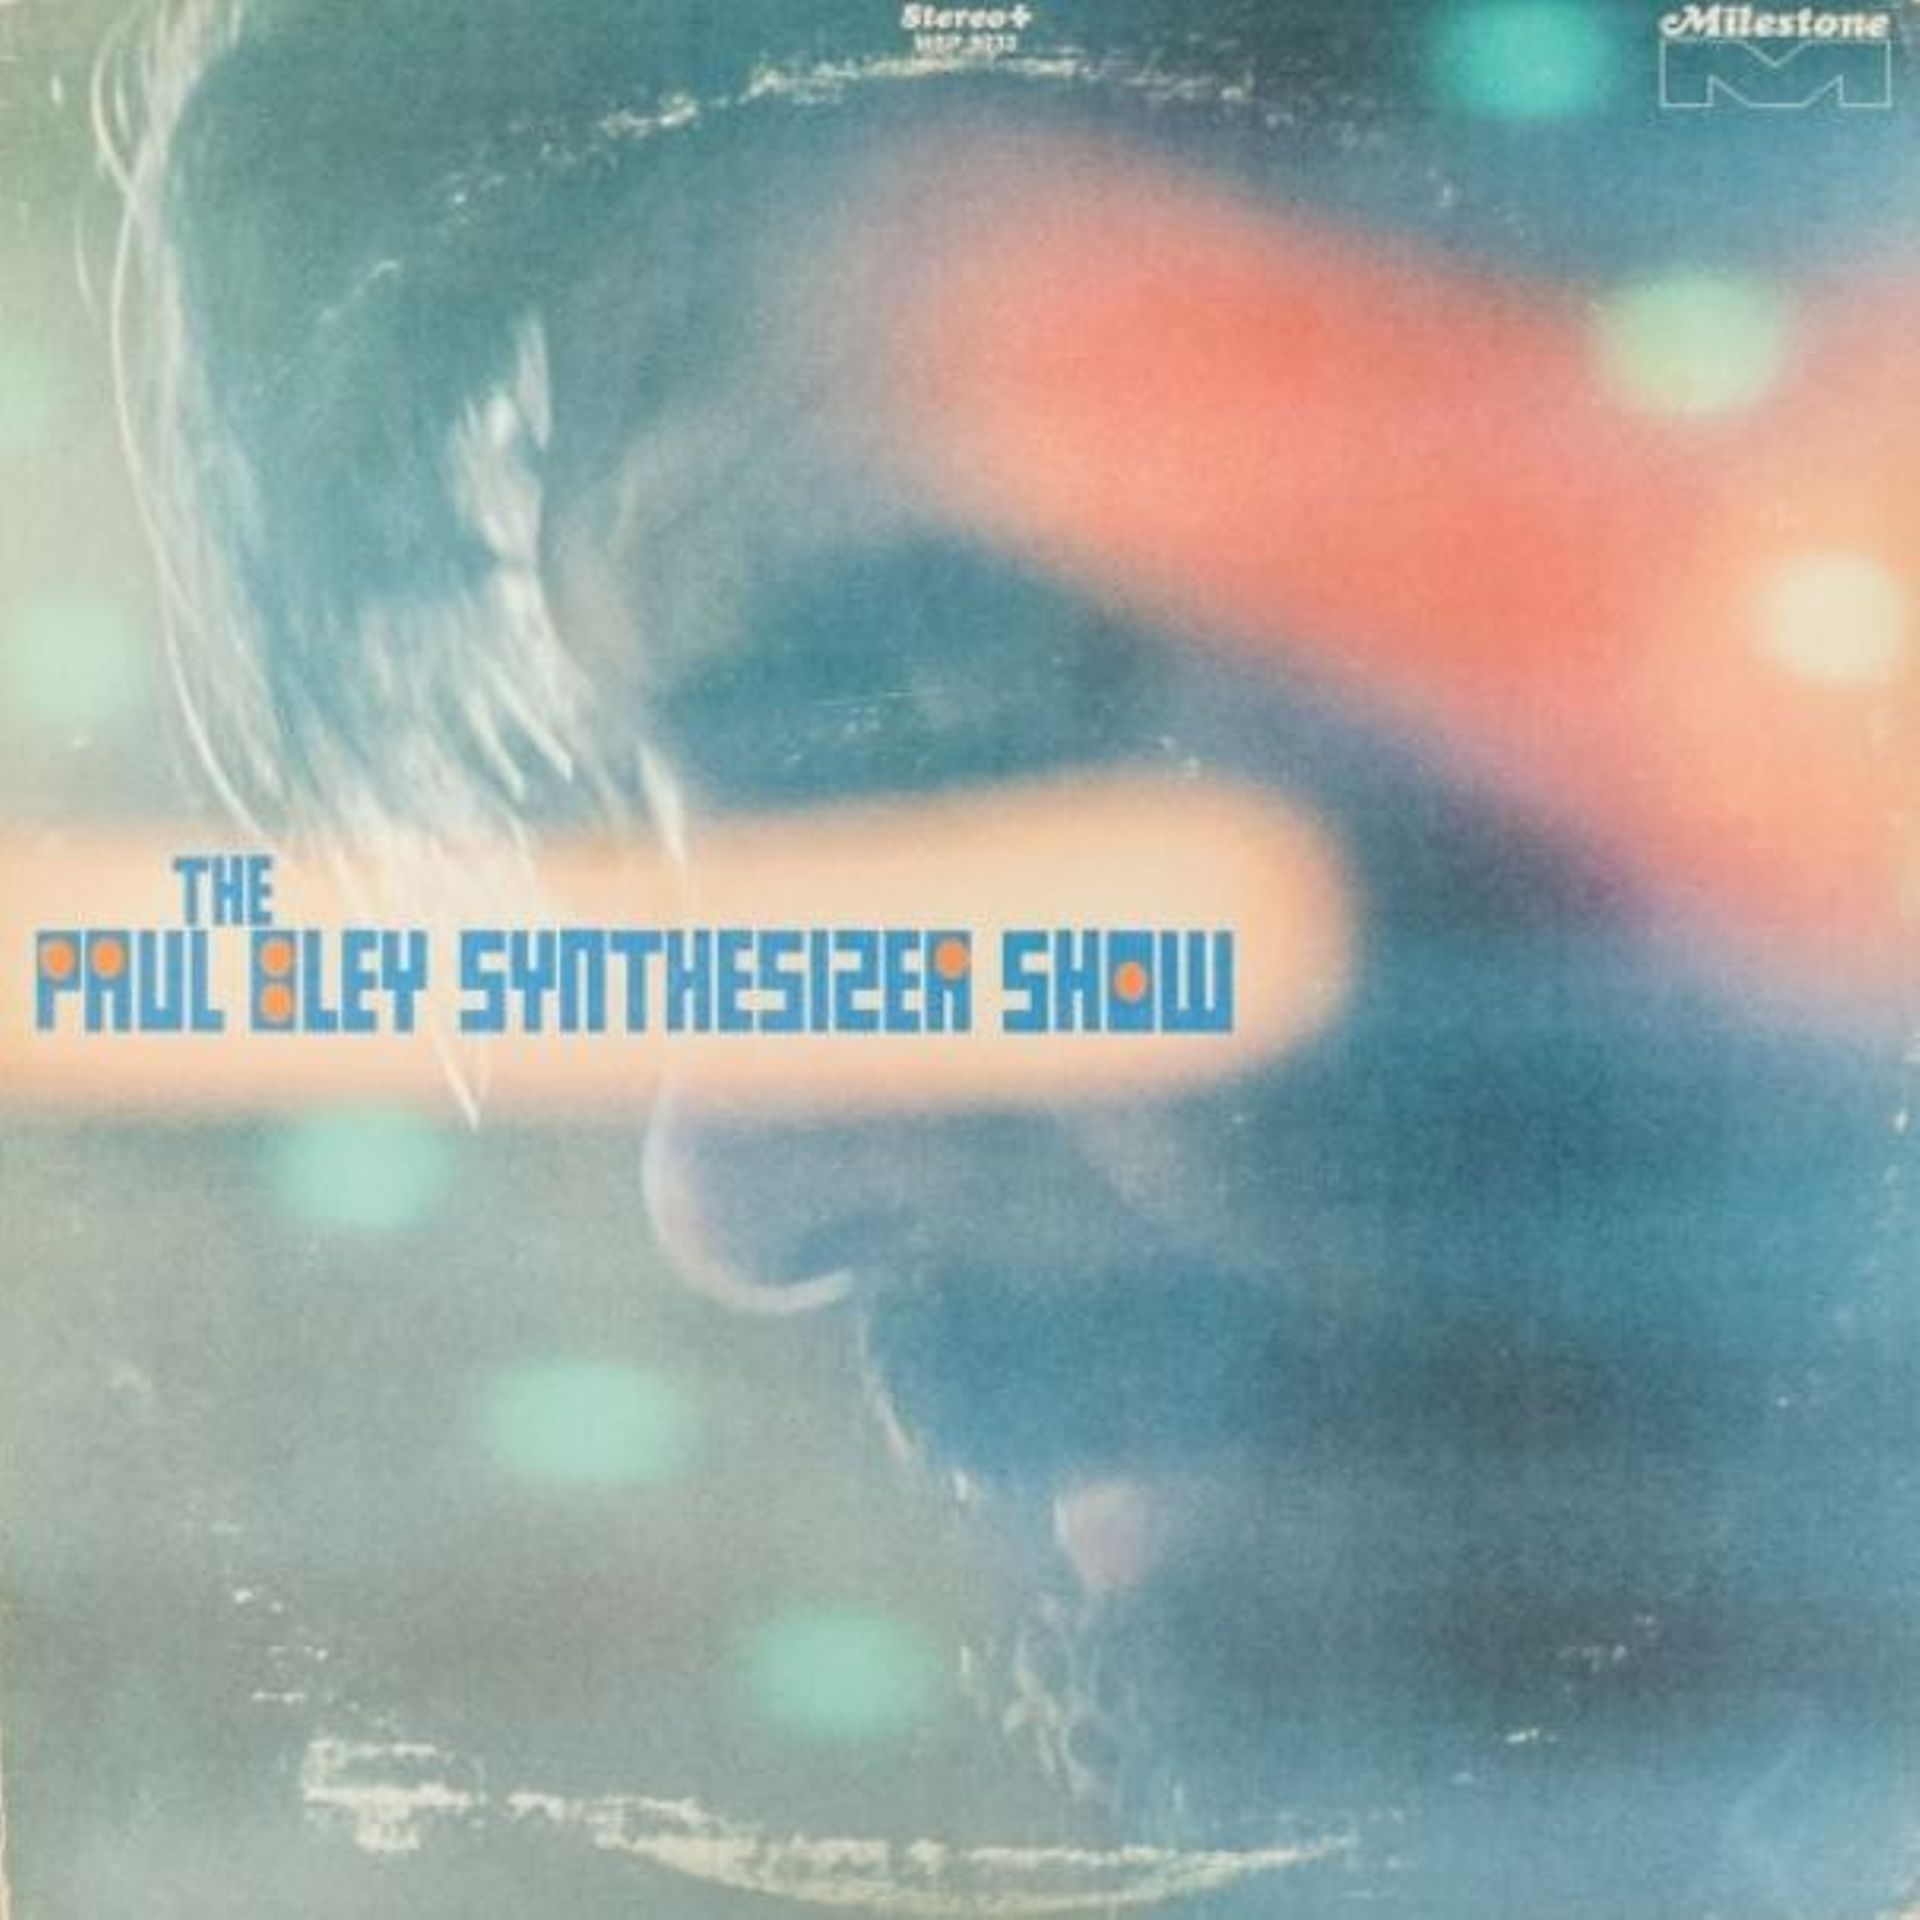 Paul Bley : "The Paul Bley Synthesizer Show" (1971)